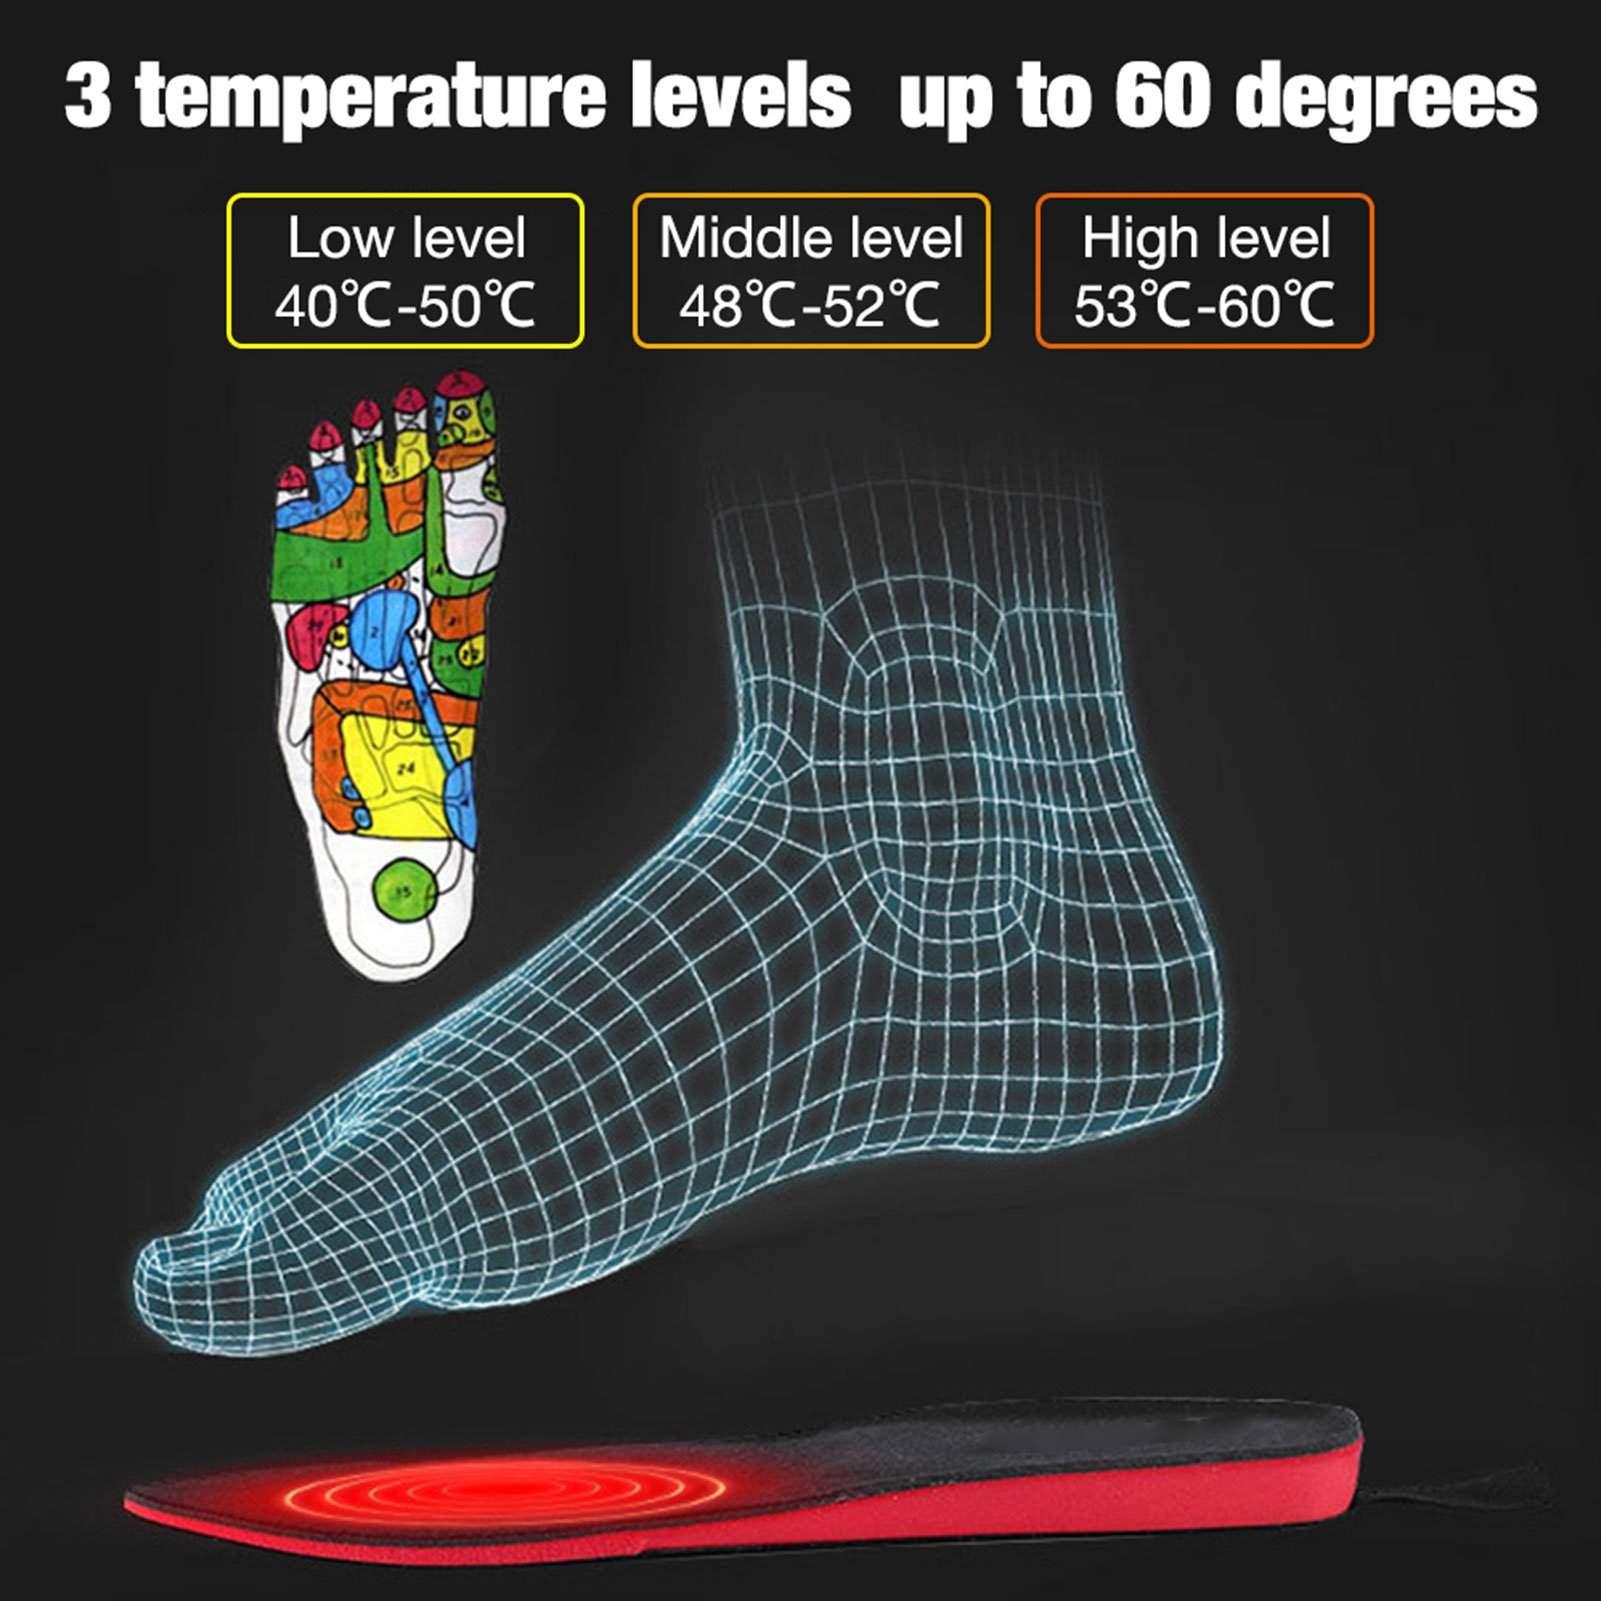 Remote Control Heated shoe Insoles - Electric Foot Warming Pad